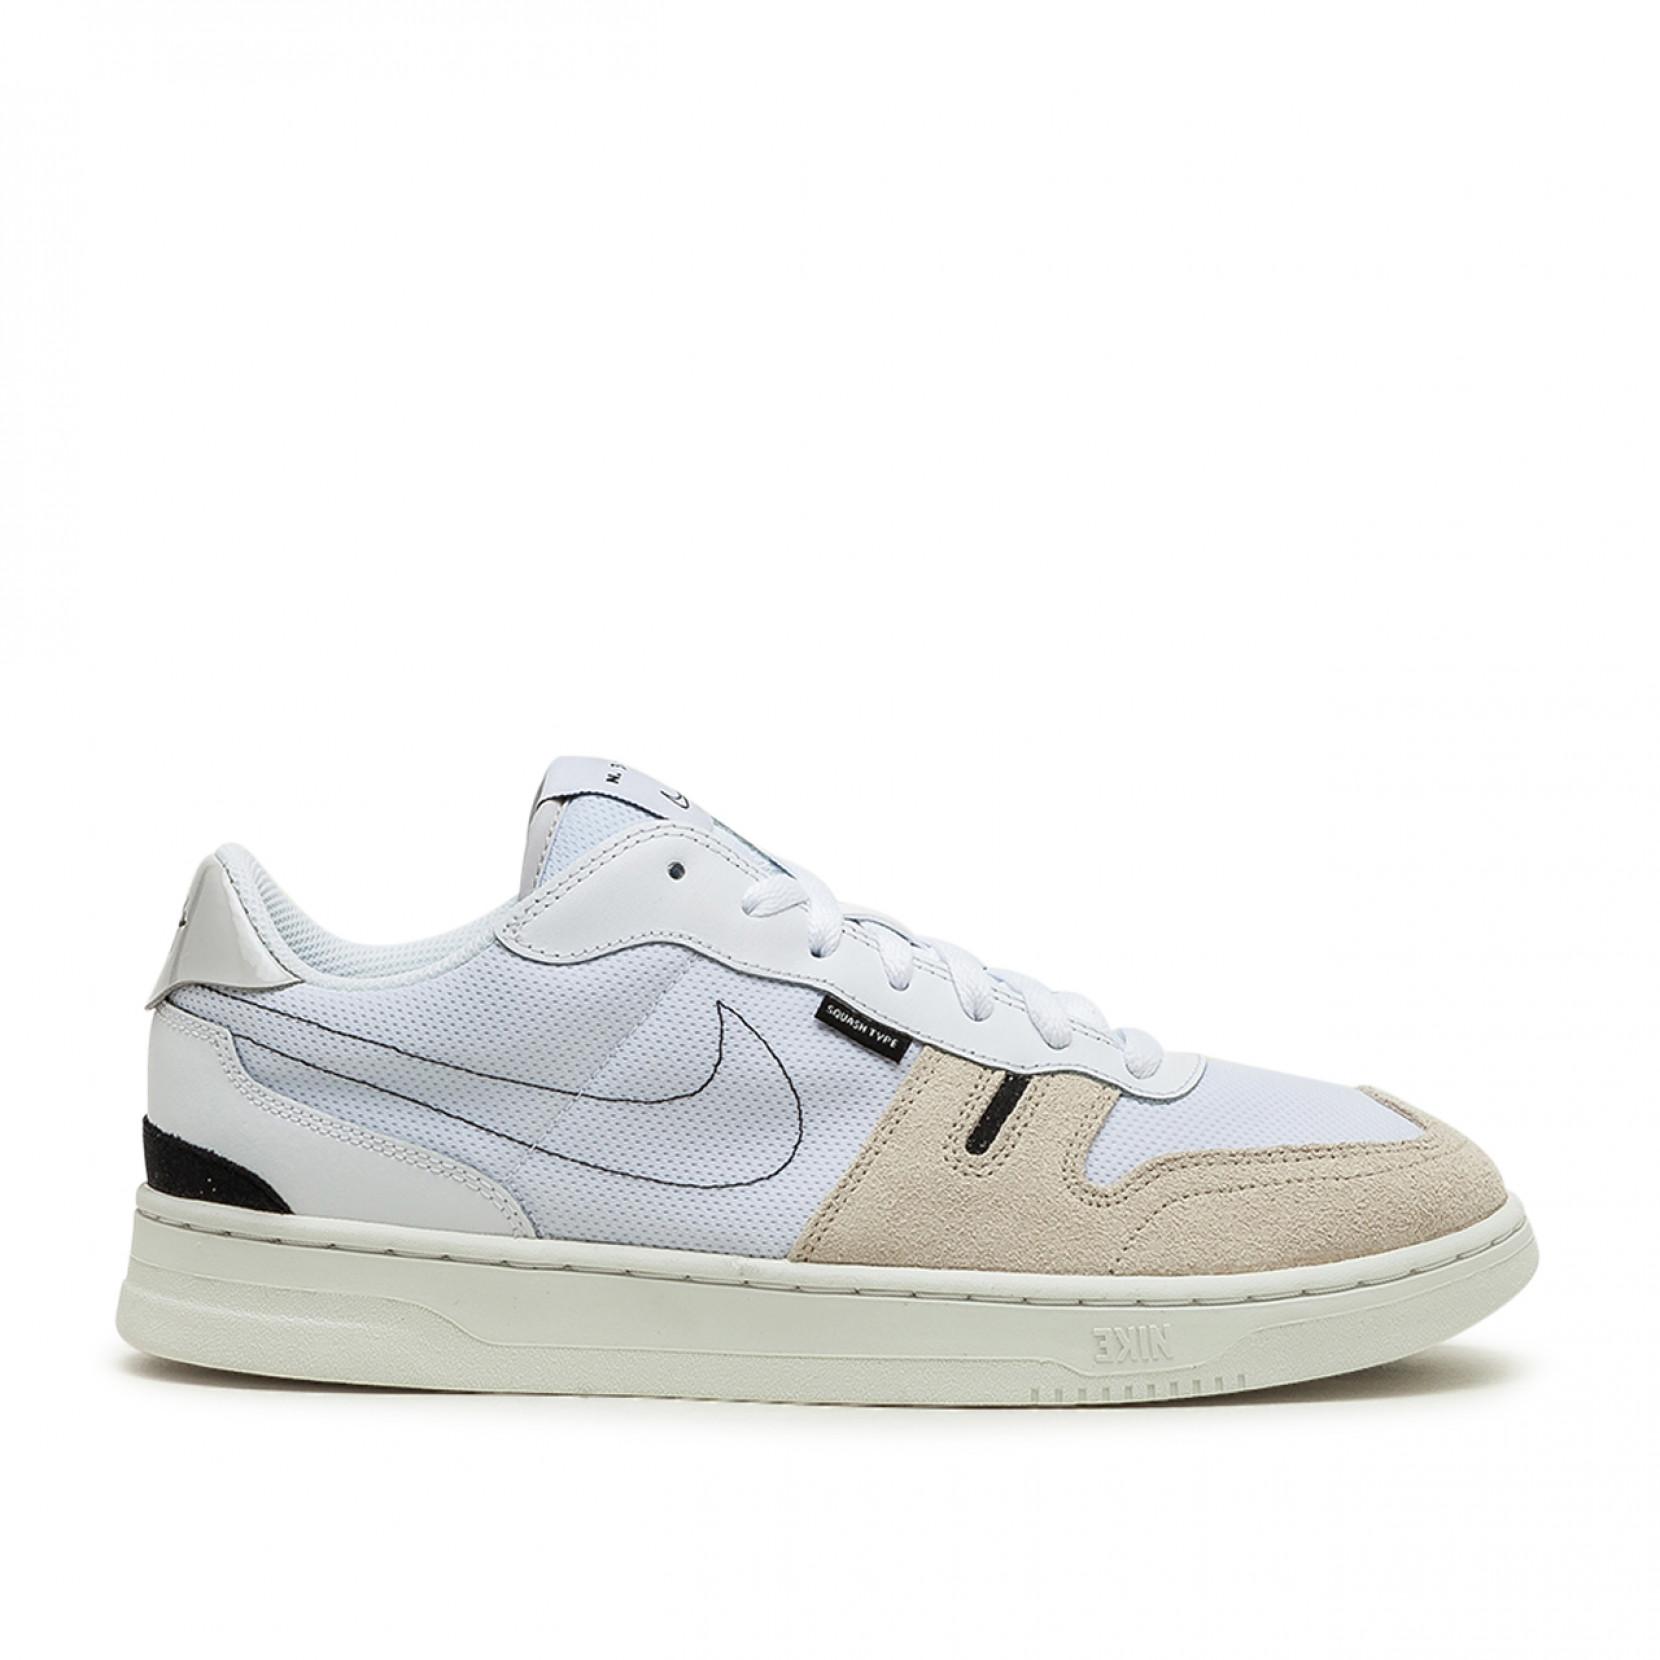 Nike Rubber Squash-type - Shoes in White for Men - Lyst